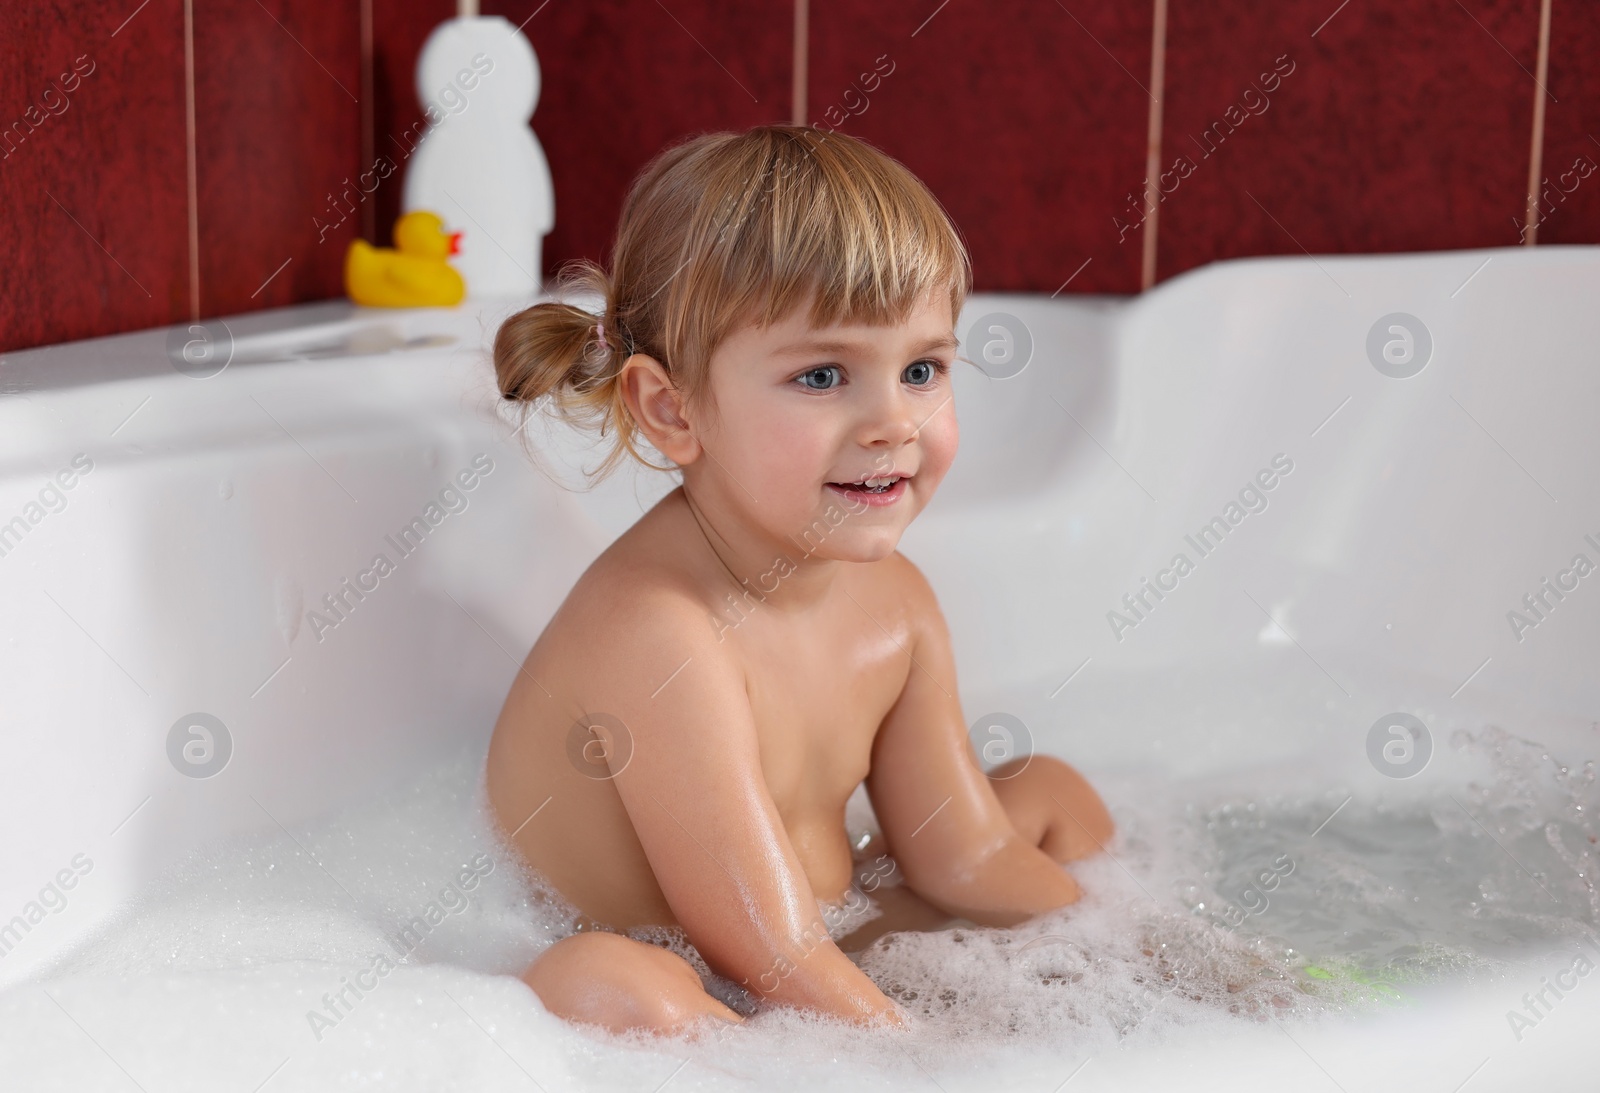 Photo of Smiling girl bathing in tub at home